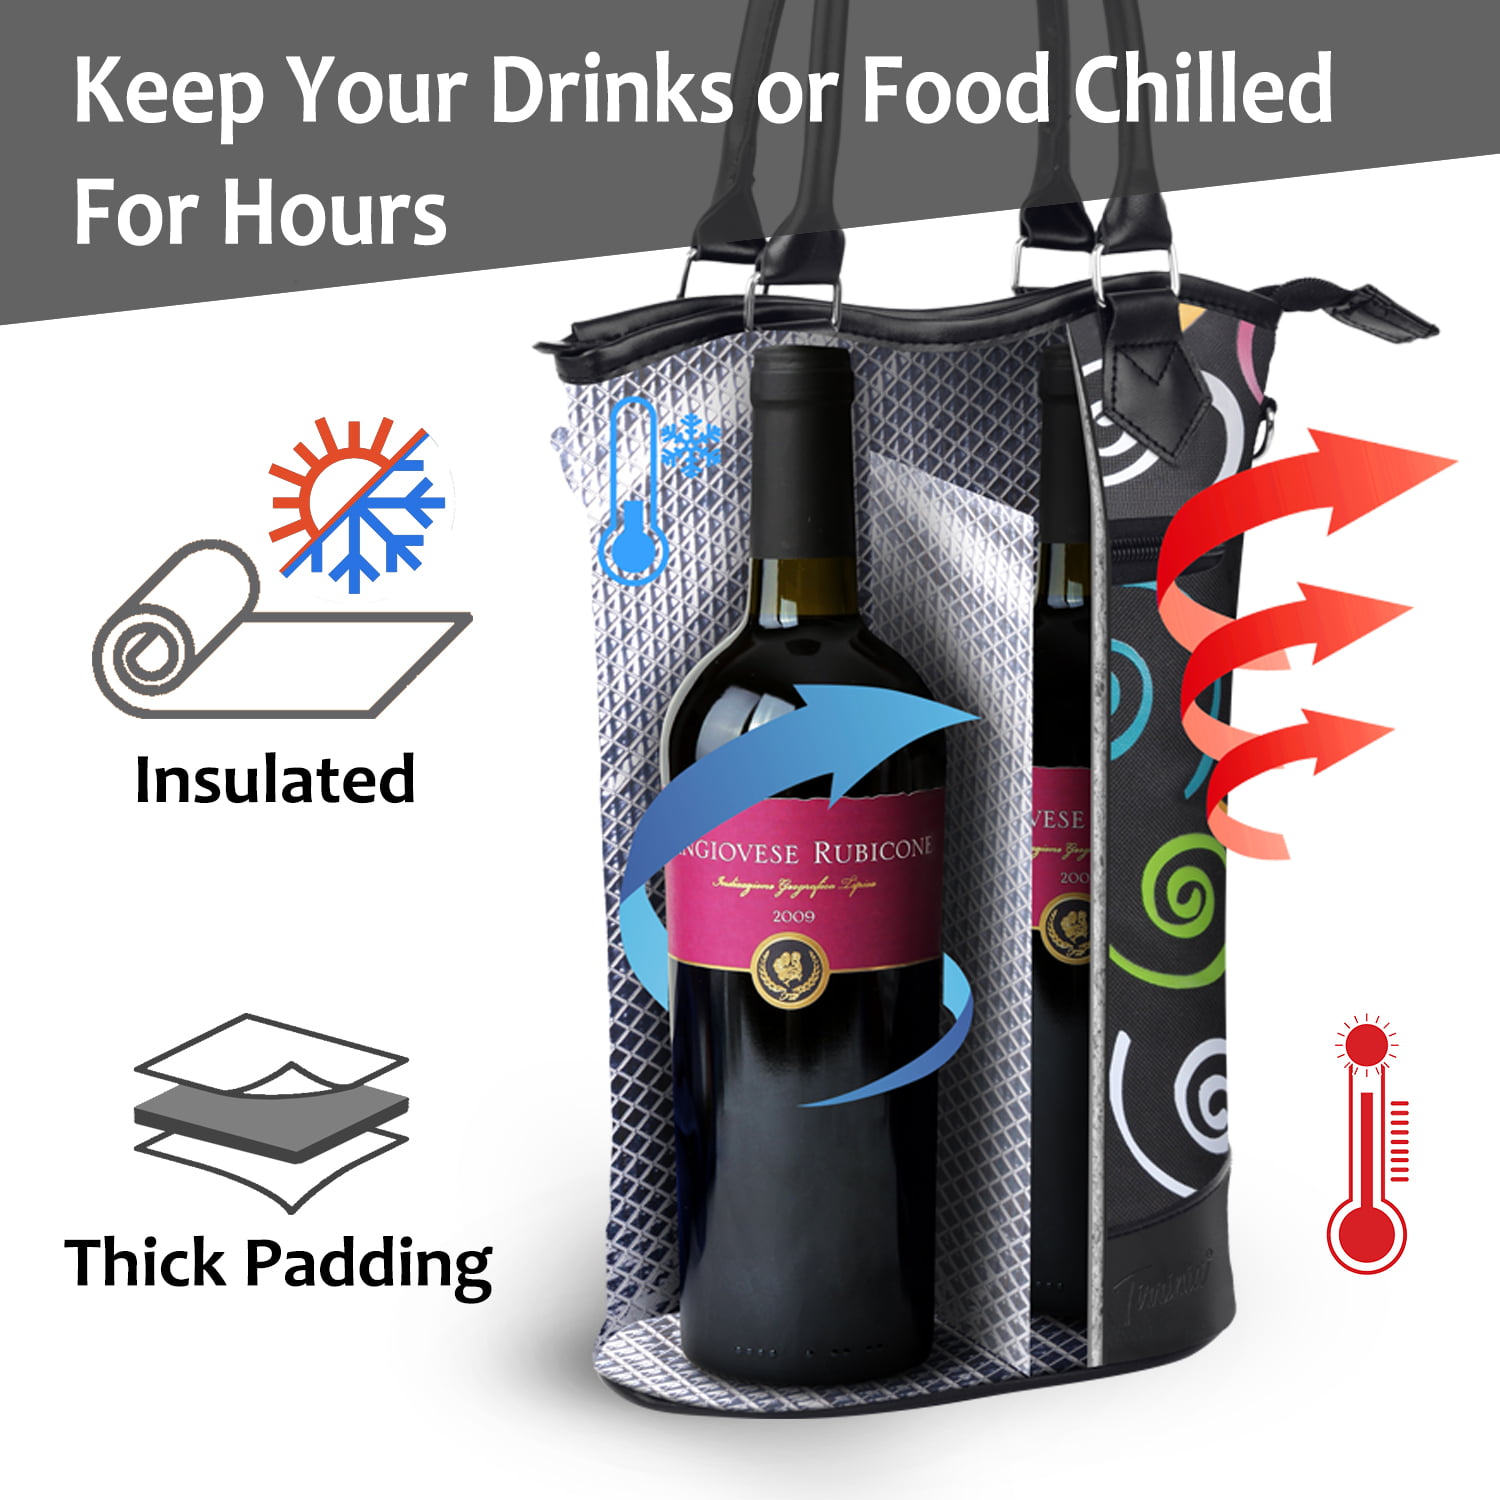 Wine Bottle Cooler from a Beverage Cooler for Happy Hour